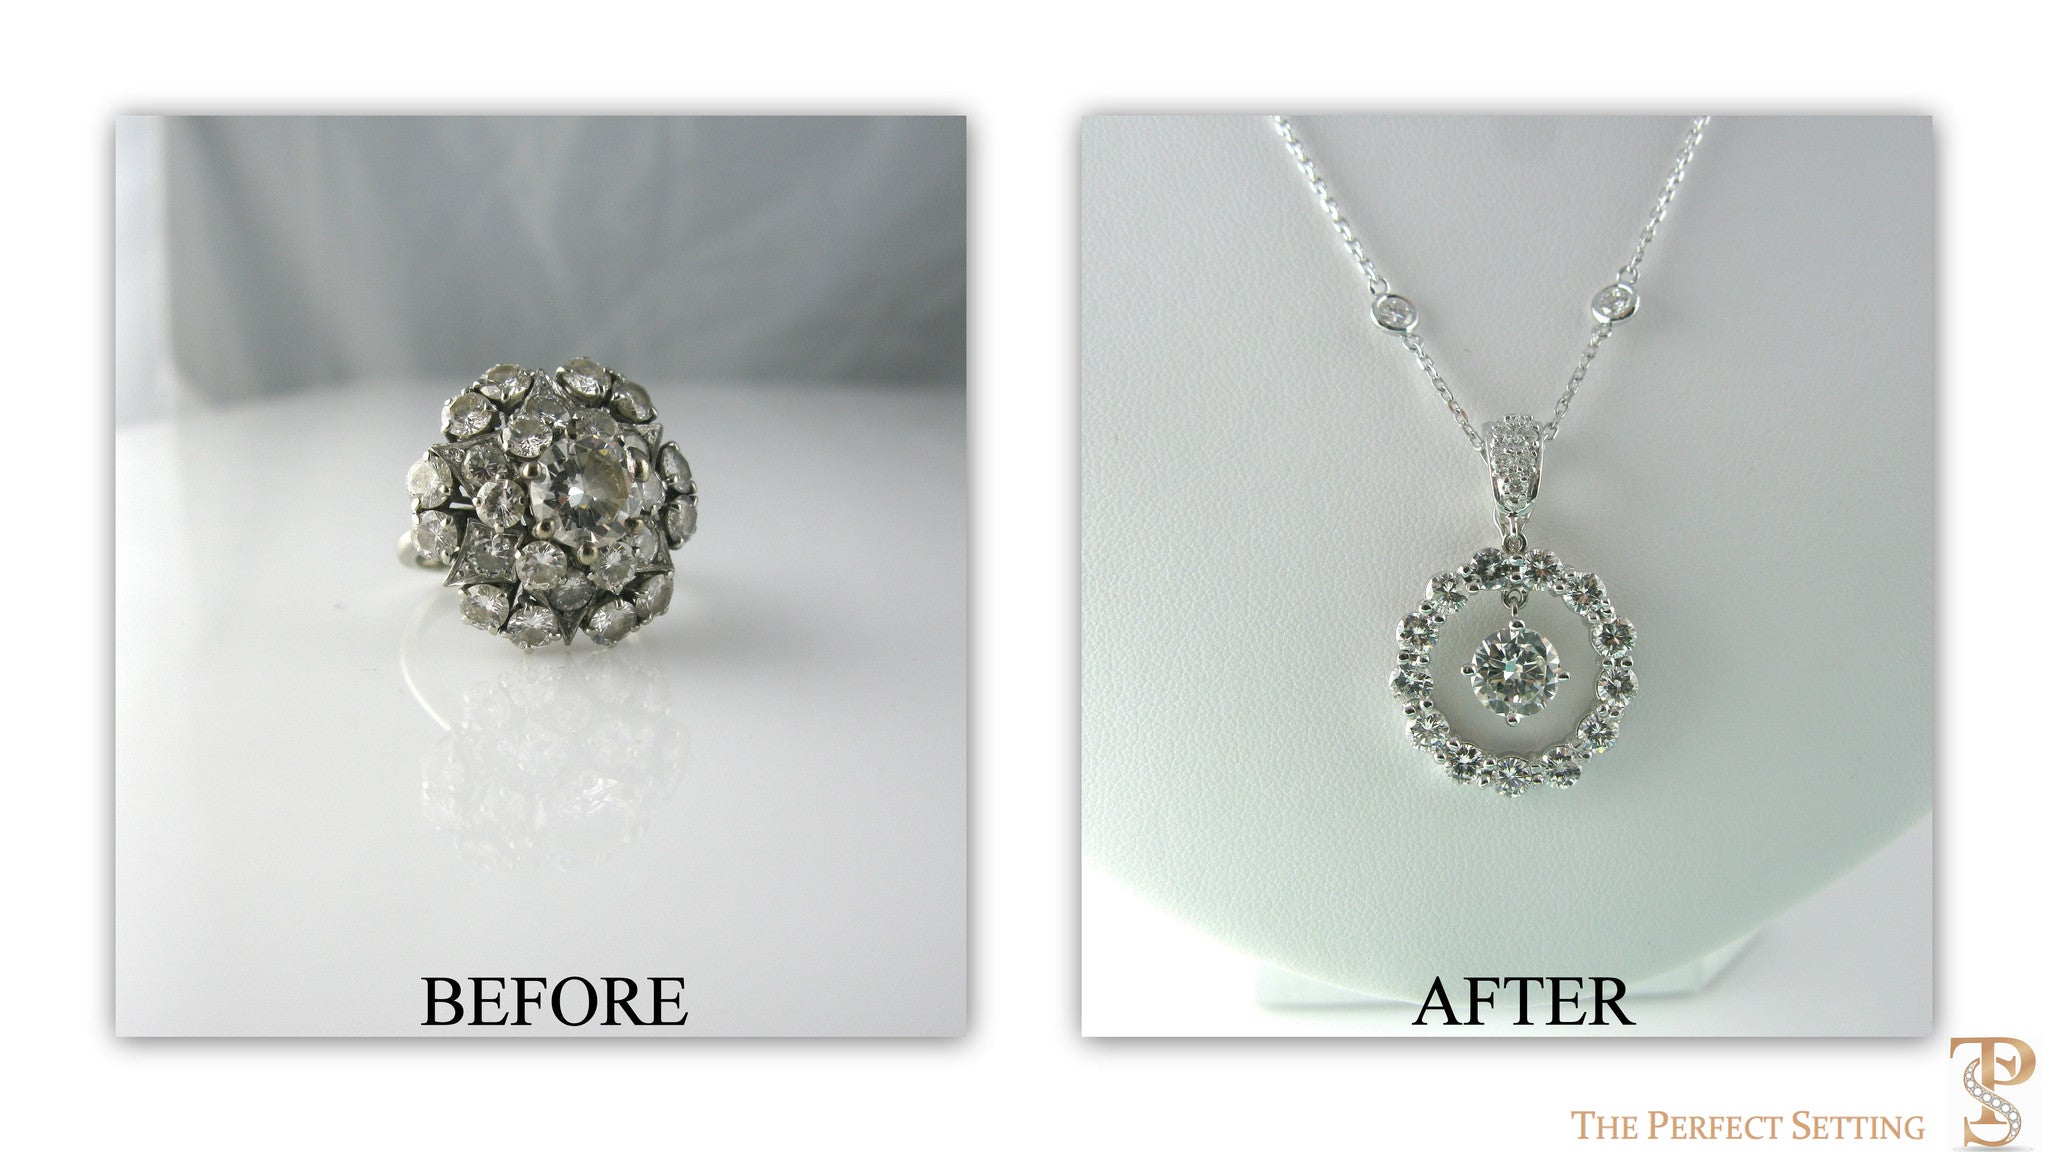 How to Convert Your Diamond Ring Into a Necklace - Our Pastimes